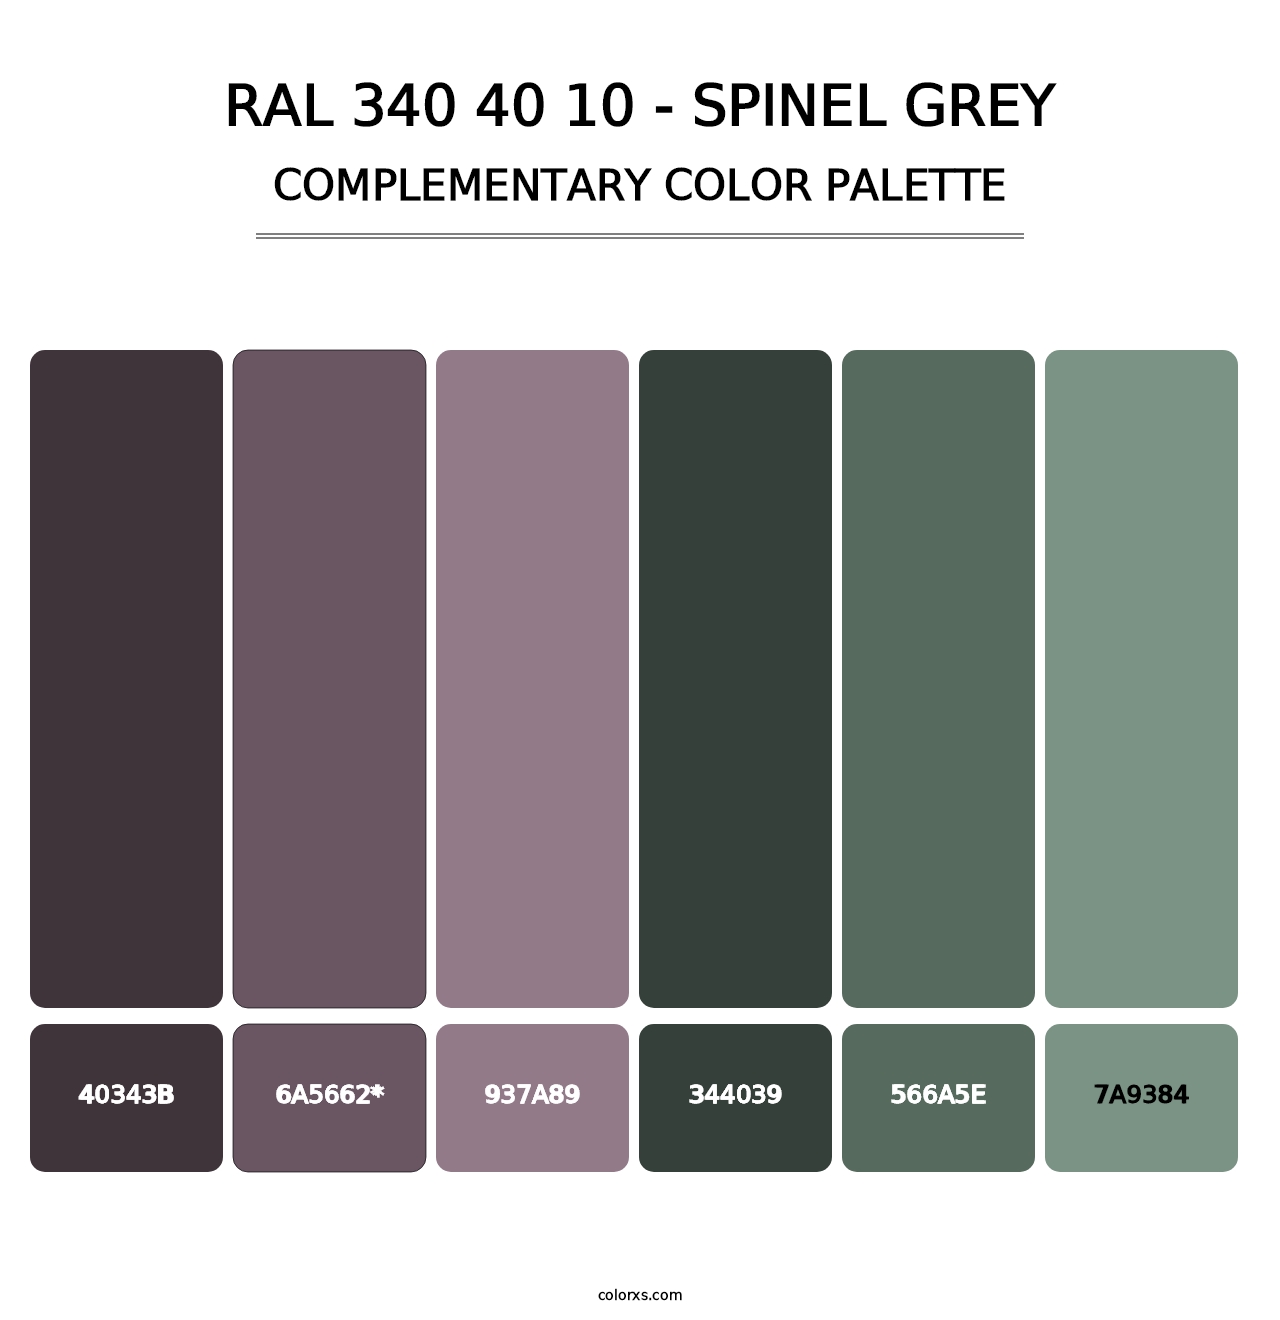 RAL 340 40 10 - Spinel Grey - Complementary Color Palette